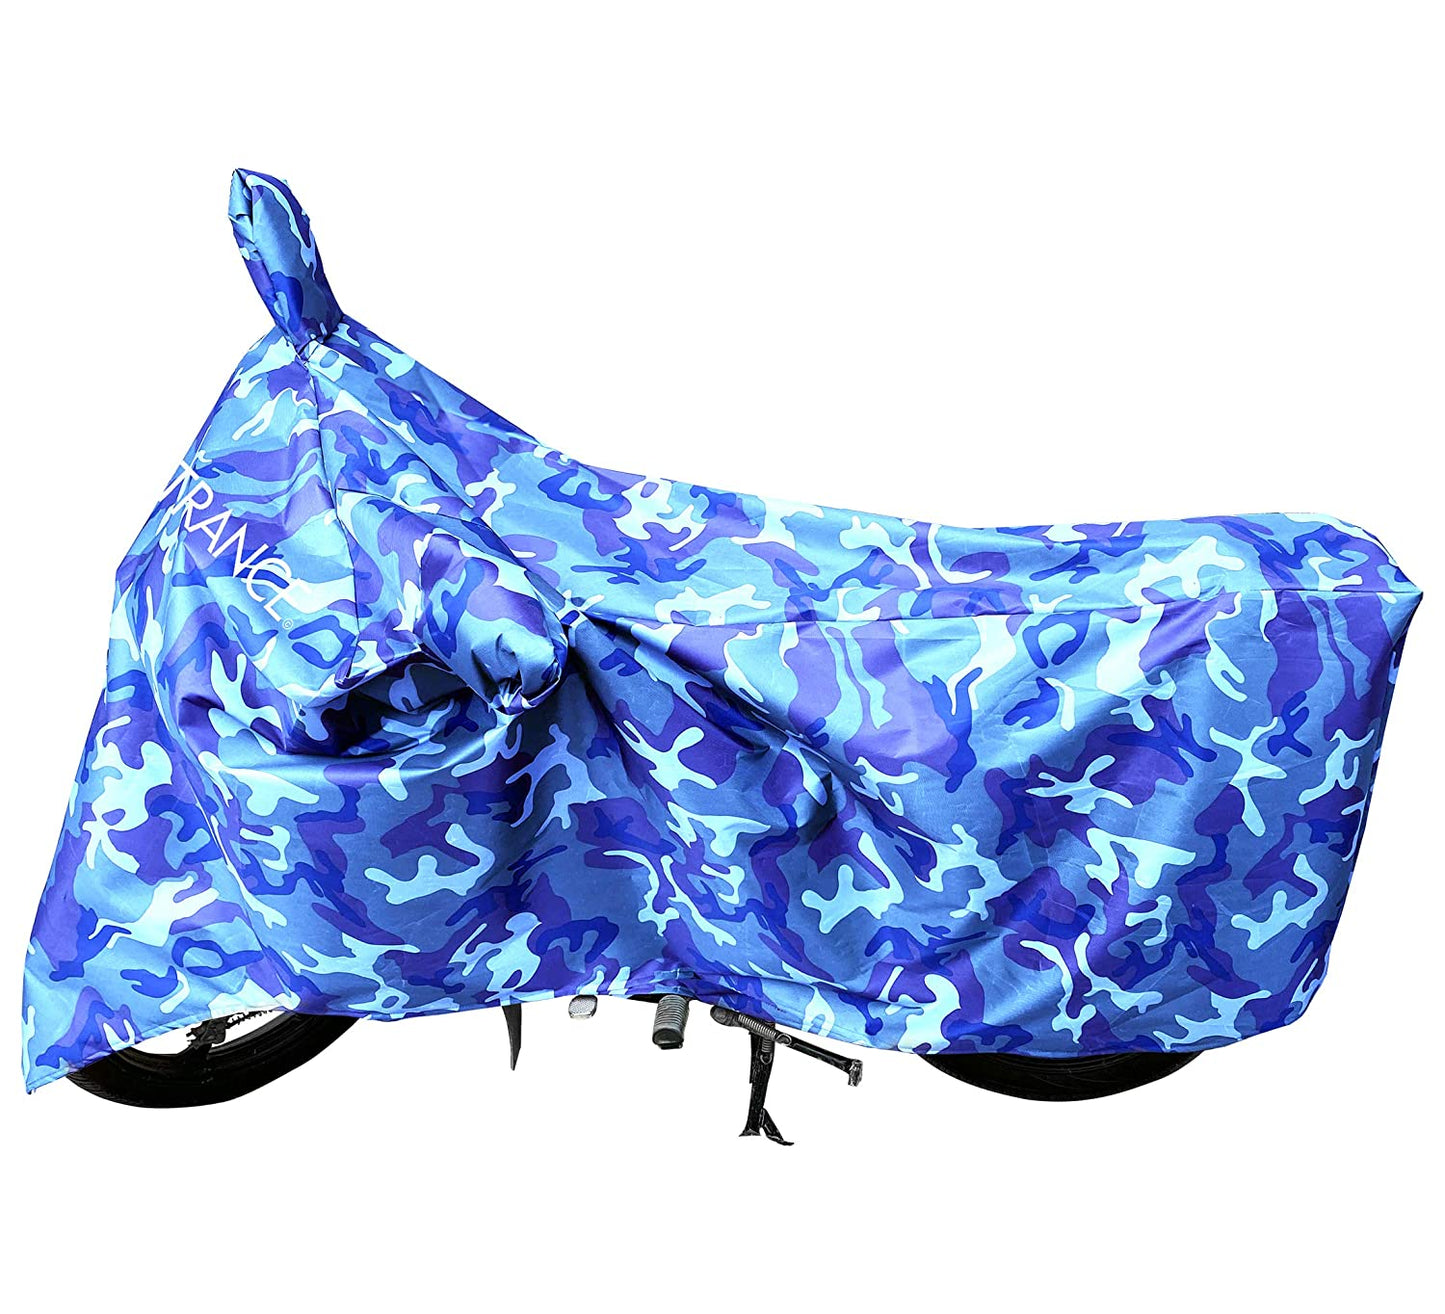 MotoTrance Jungle Bike Body Covers For Hero Passion Pro TR - Interlock-Stitched Waterproof and Heat Resistant with Mirror Pockets